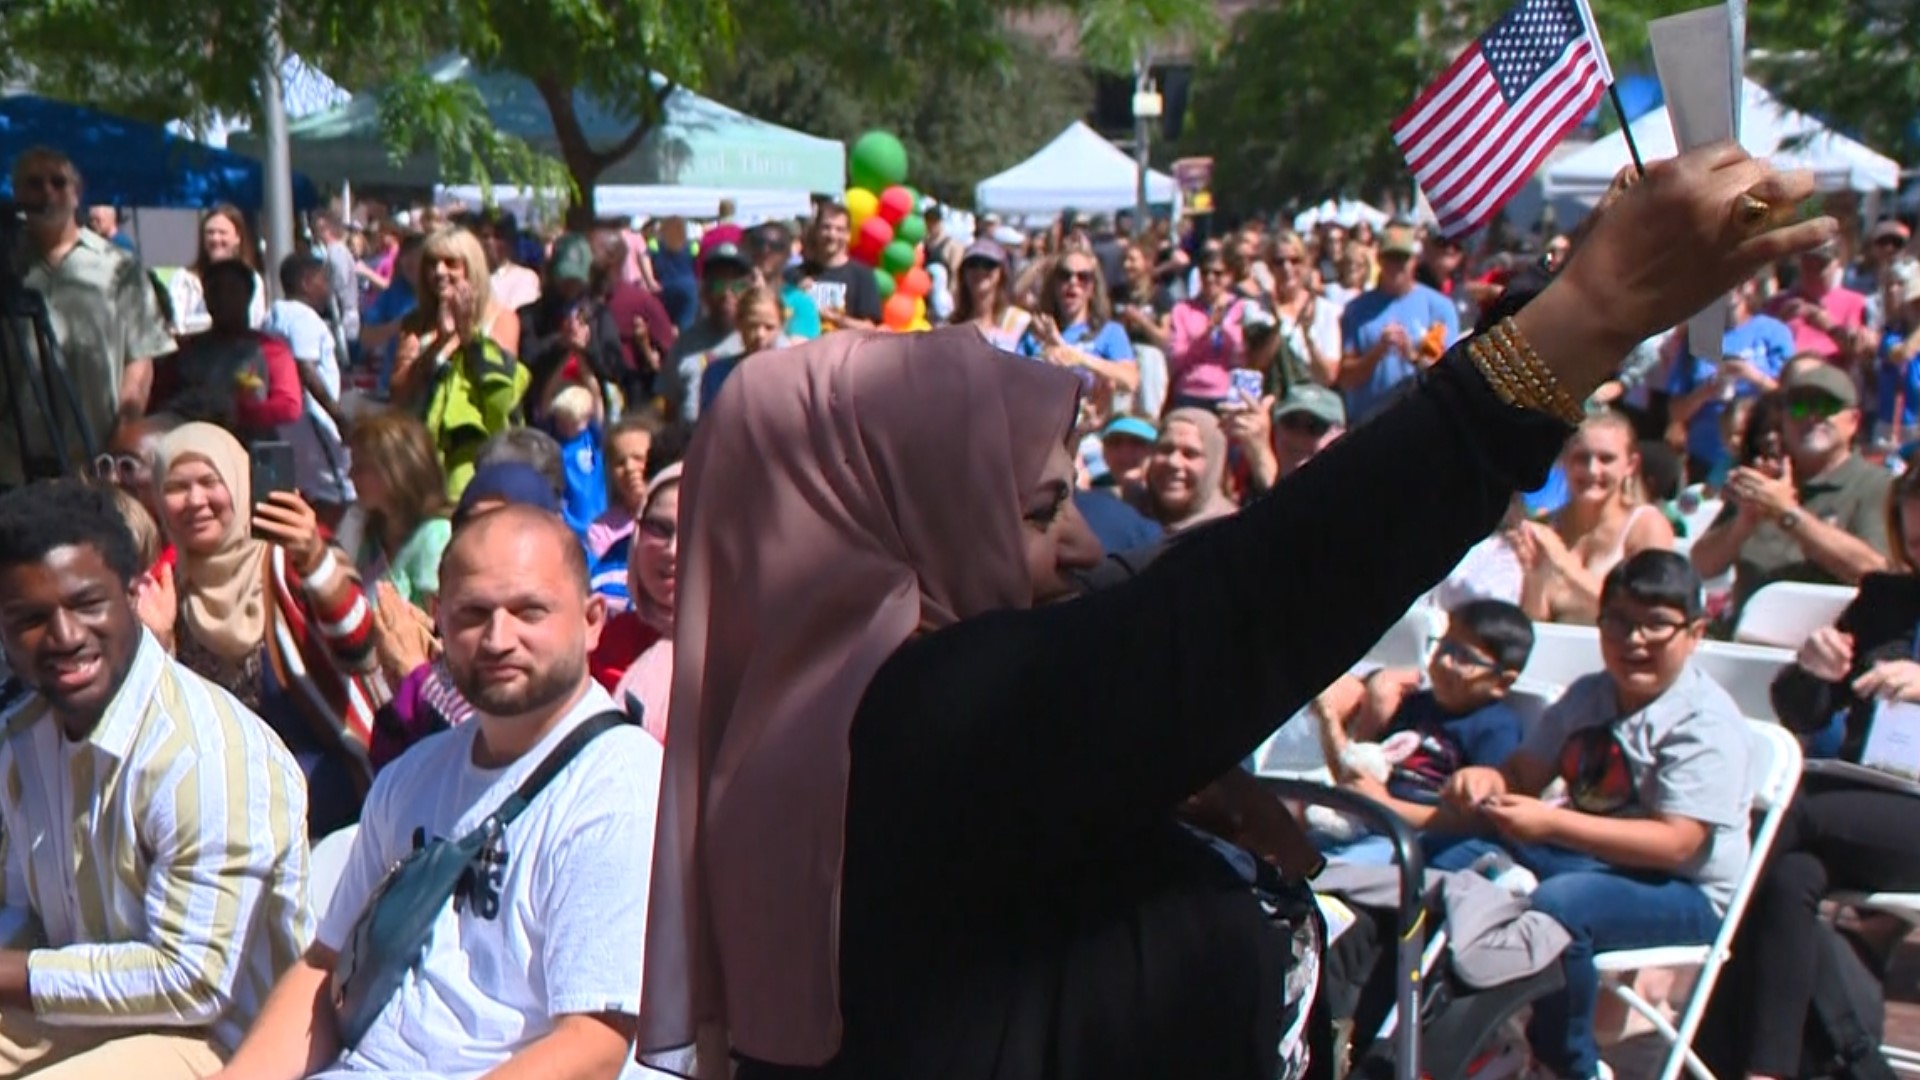 World Refugee Day recognizes the contributions refugees bring to communities across the globe. During Saturday's event in Boise, 14 new Americans were celebrated.